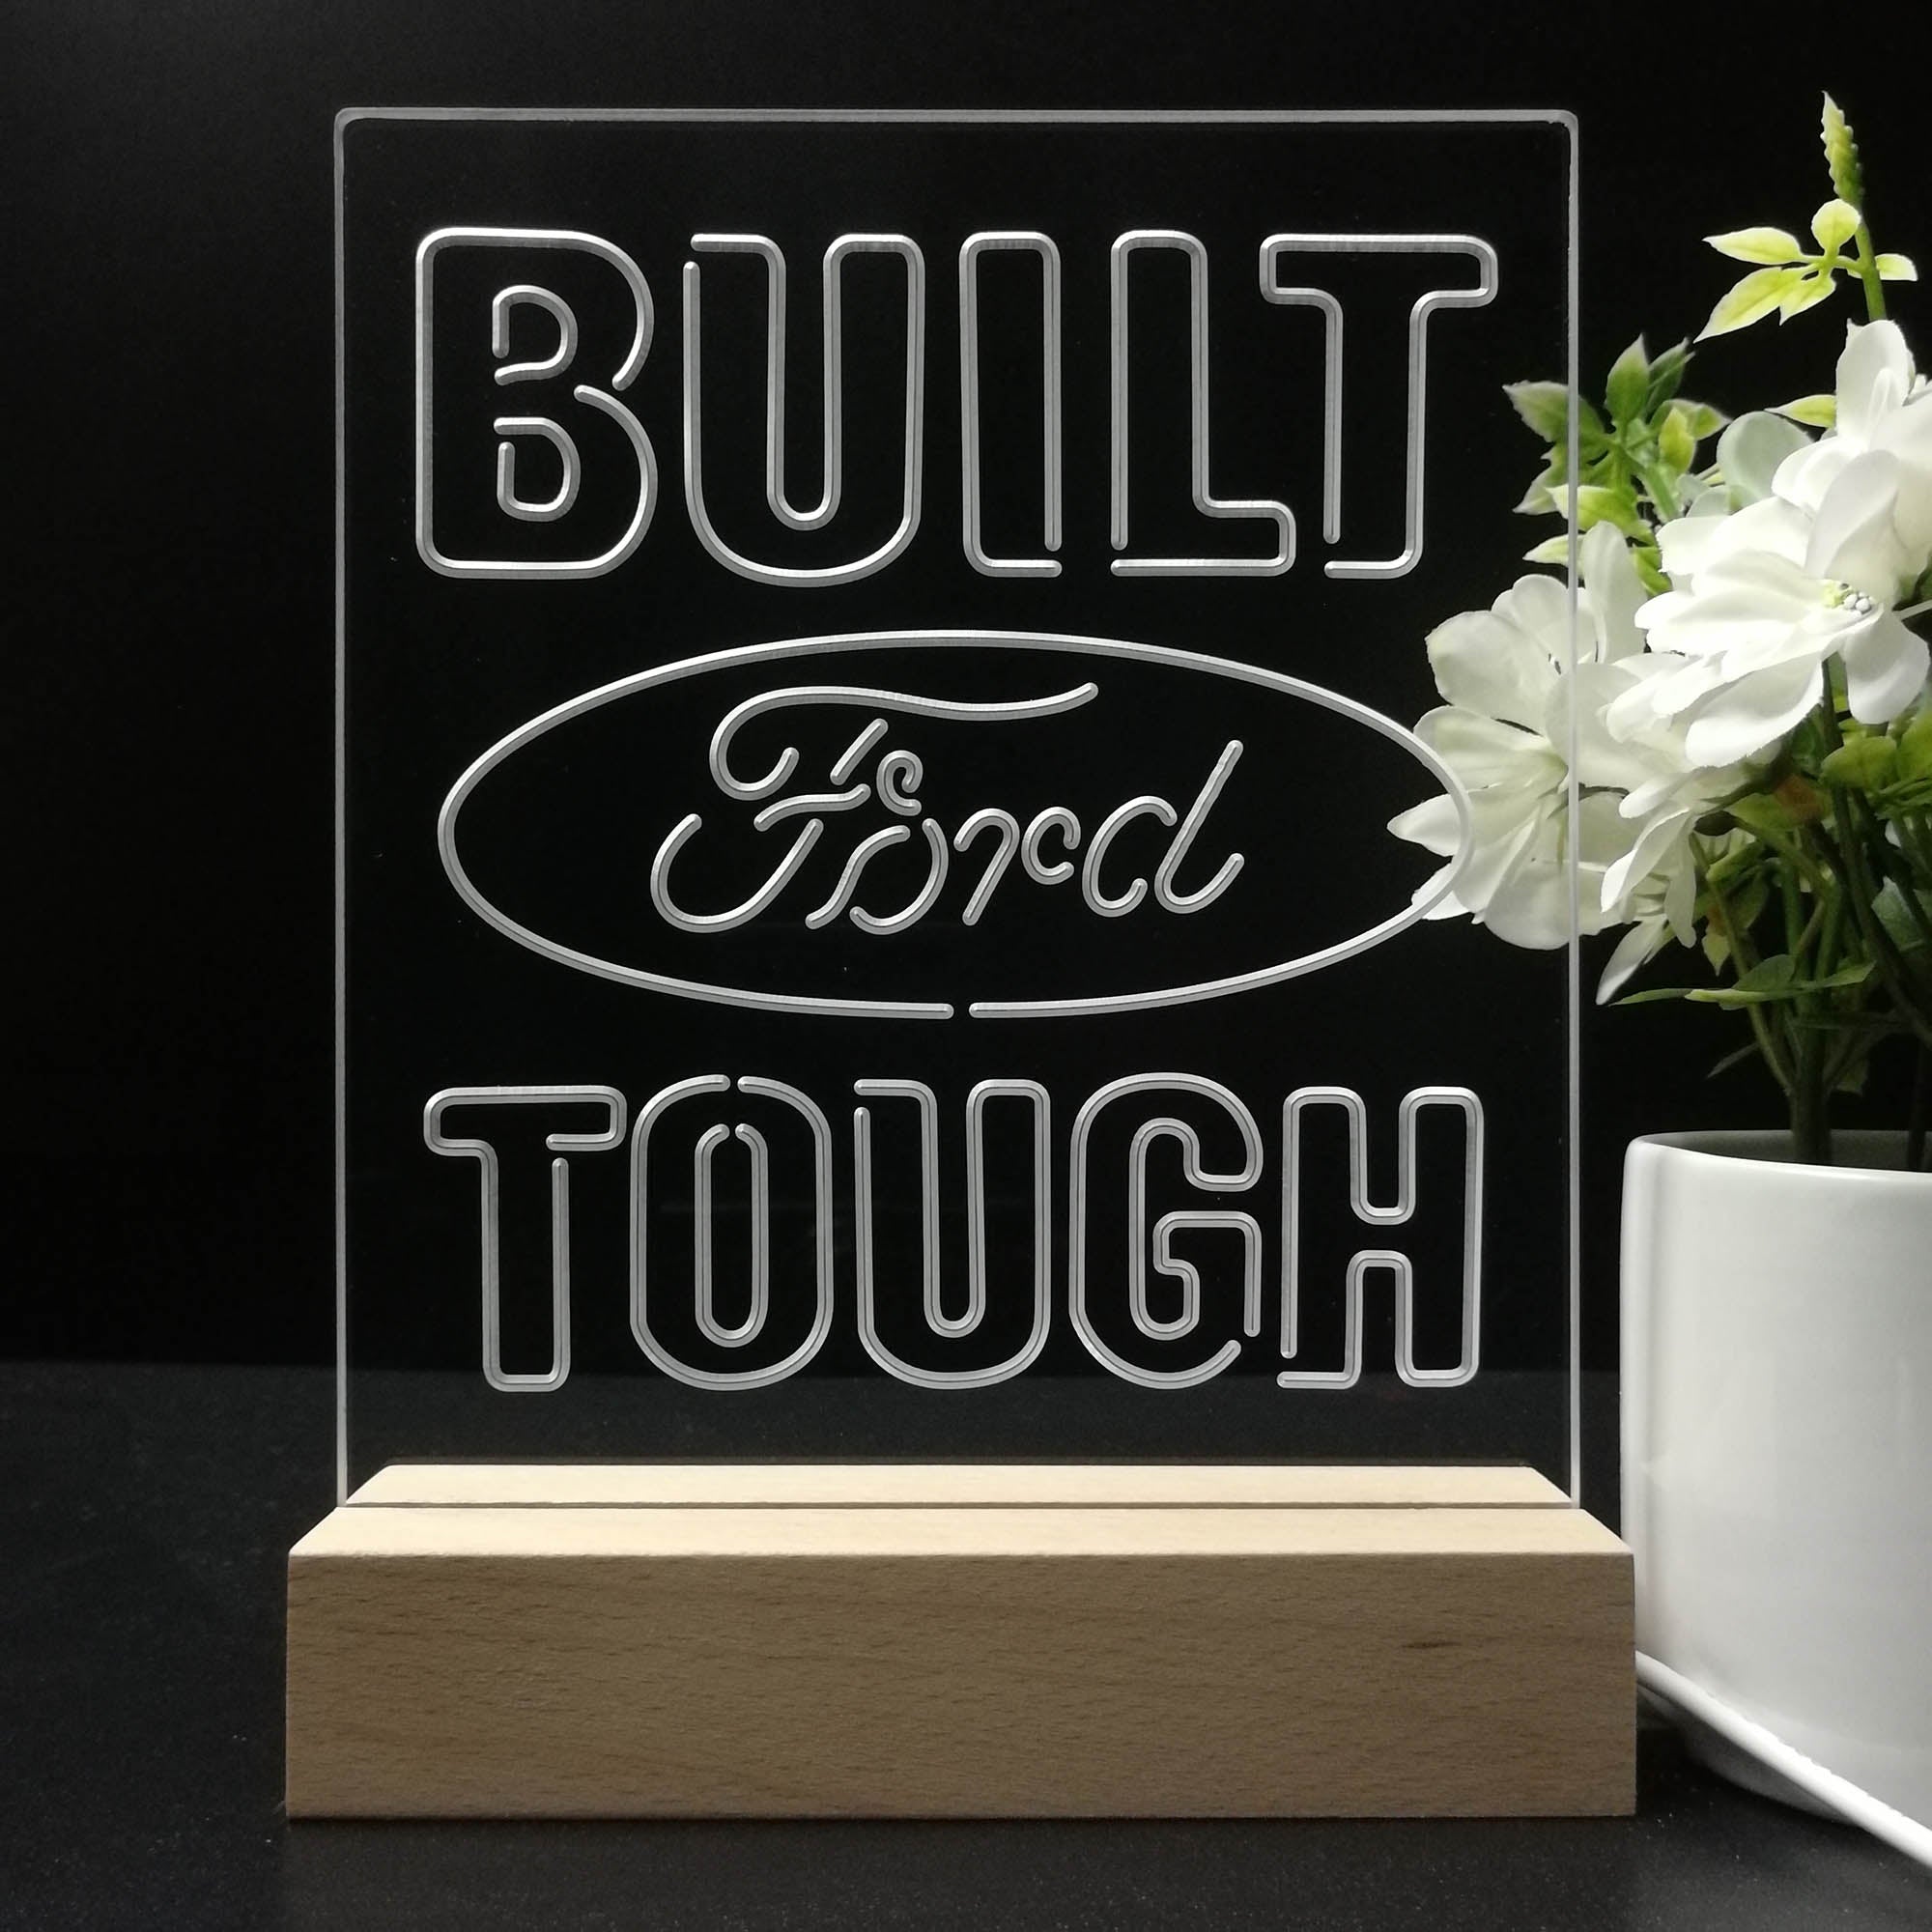 Built Touch Ford 3D Illusion Night Light Desk Lamp